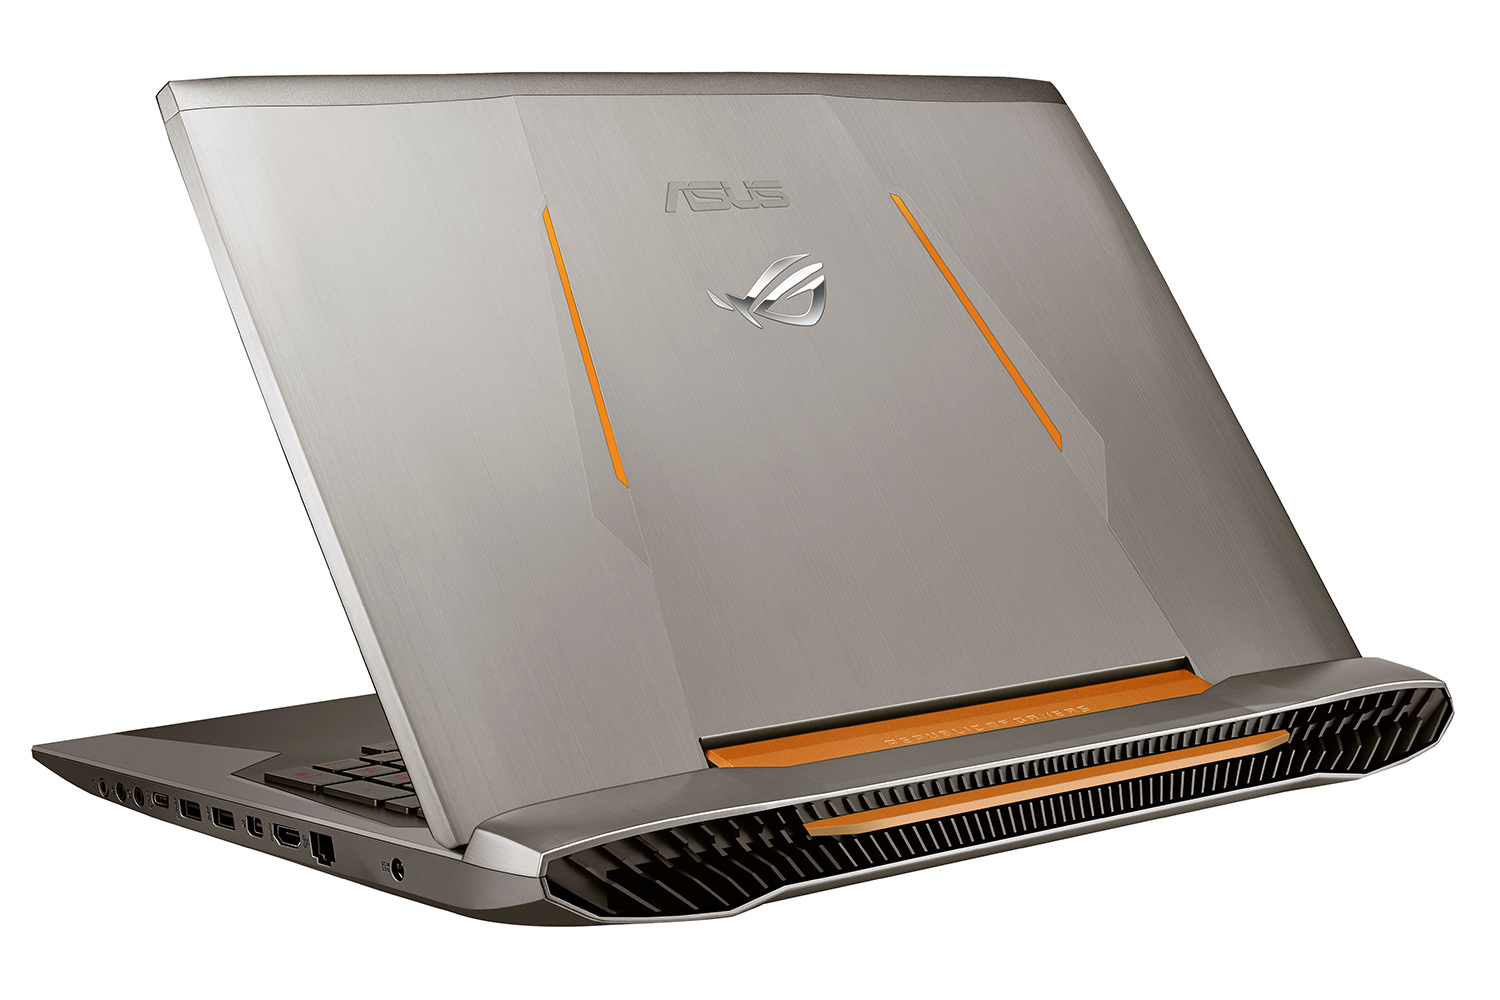 asus announces water cooled gaming laptop at ifa 2015 g752